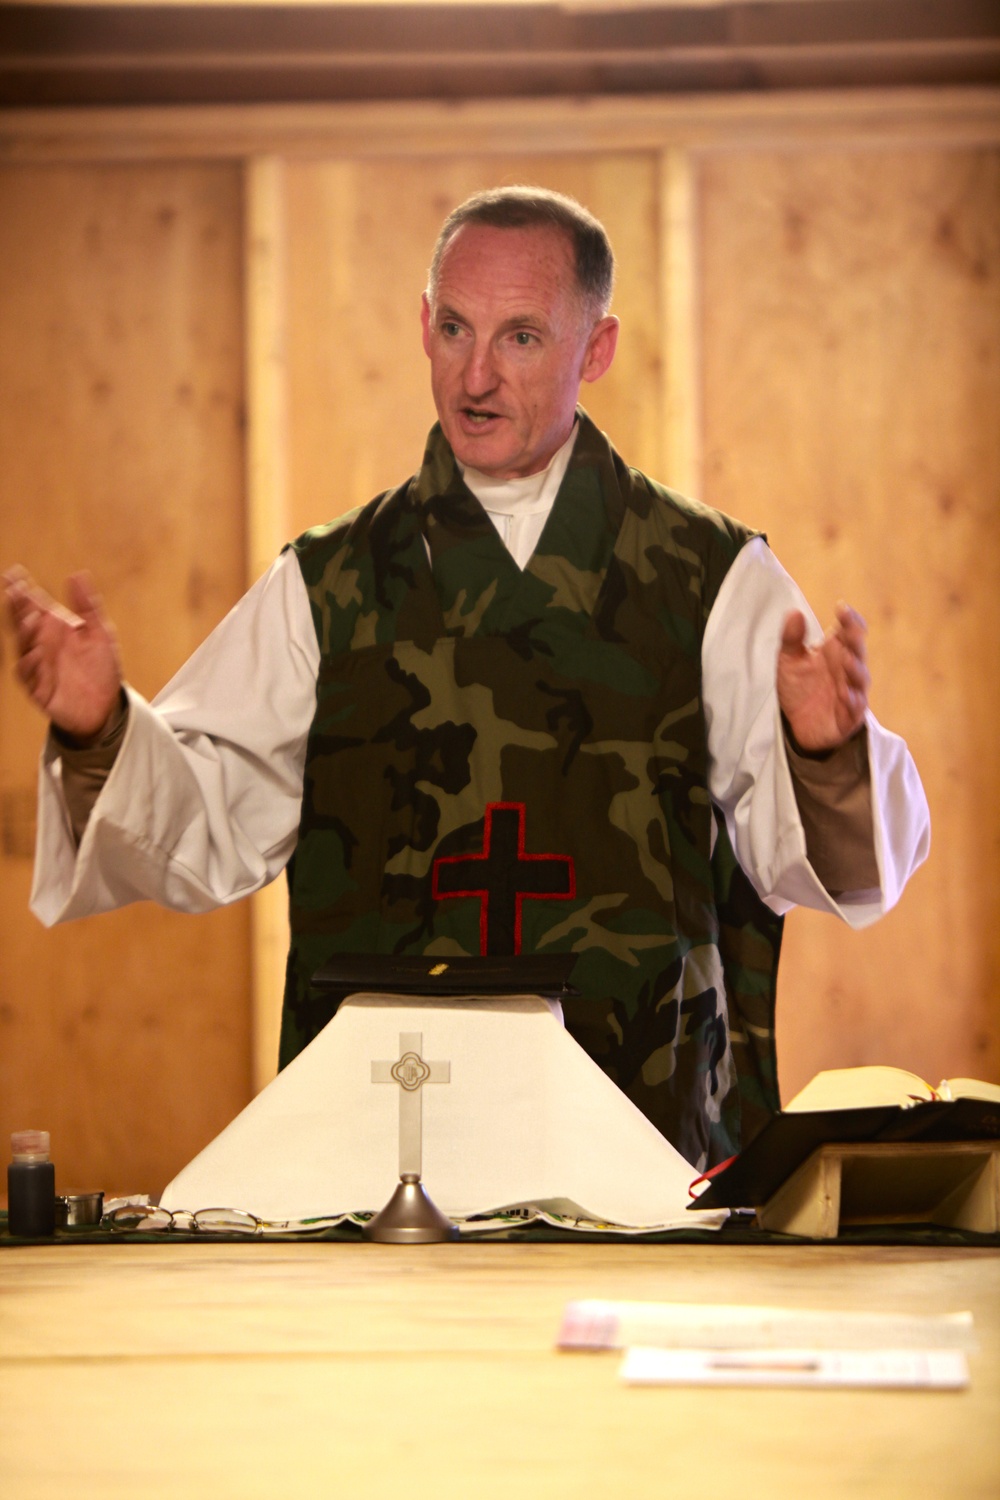 Wing chaplain provides spiritual help on the fly